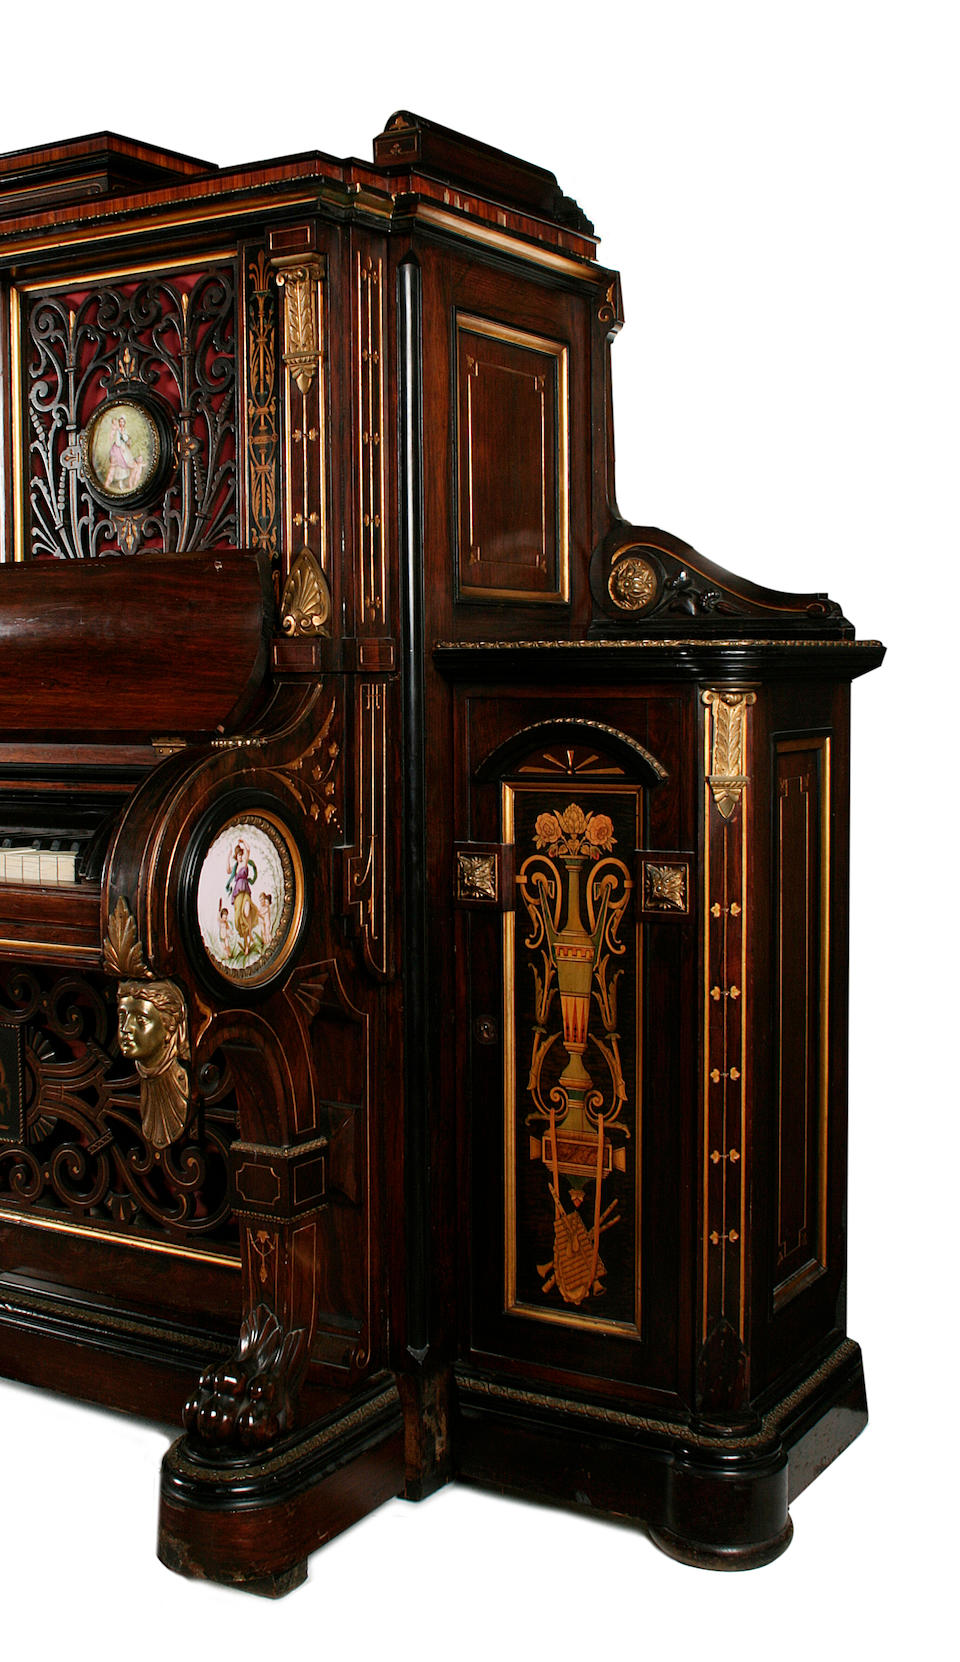 An important American late 19th century ormolu and porcelain-mounted, parcel-gilt, rosewood, tulipwood, sycamore, ebony, ebonised and marquetry upright piano by Steinway and Sons, index number 32260, New York, the cabinet work by E.W. Hutchings and Son, the painted porcelain plaques by A. Deligny, circa 1875